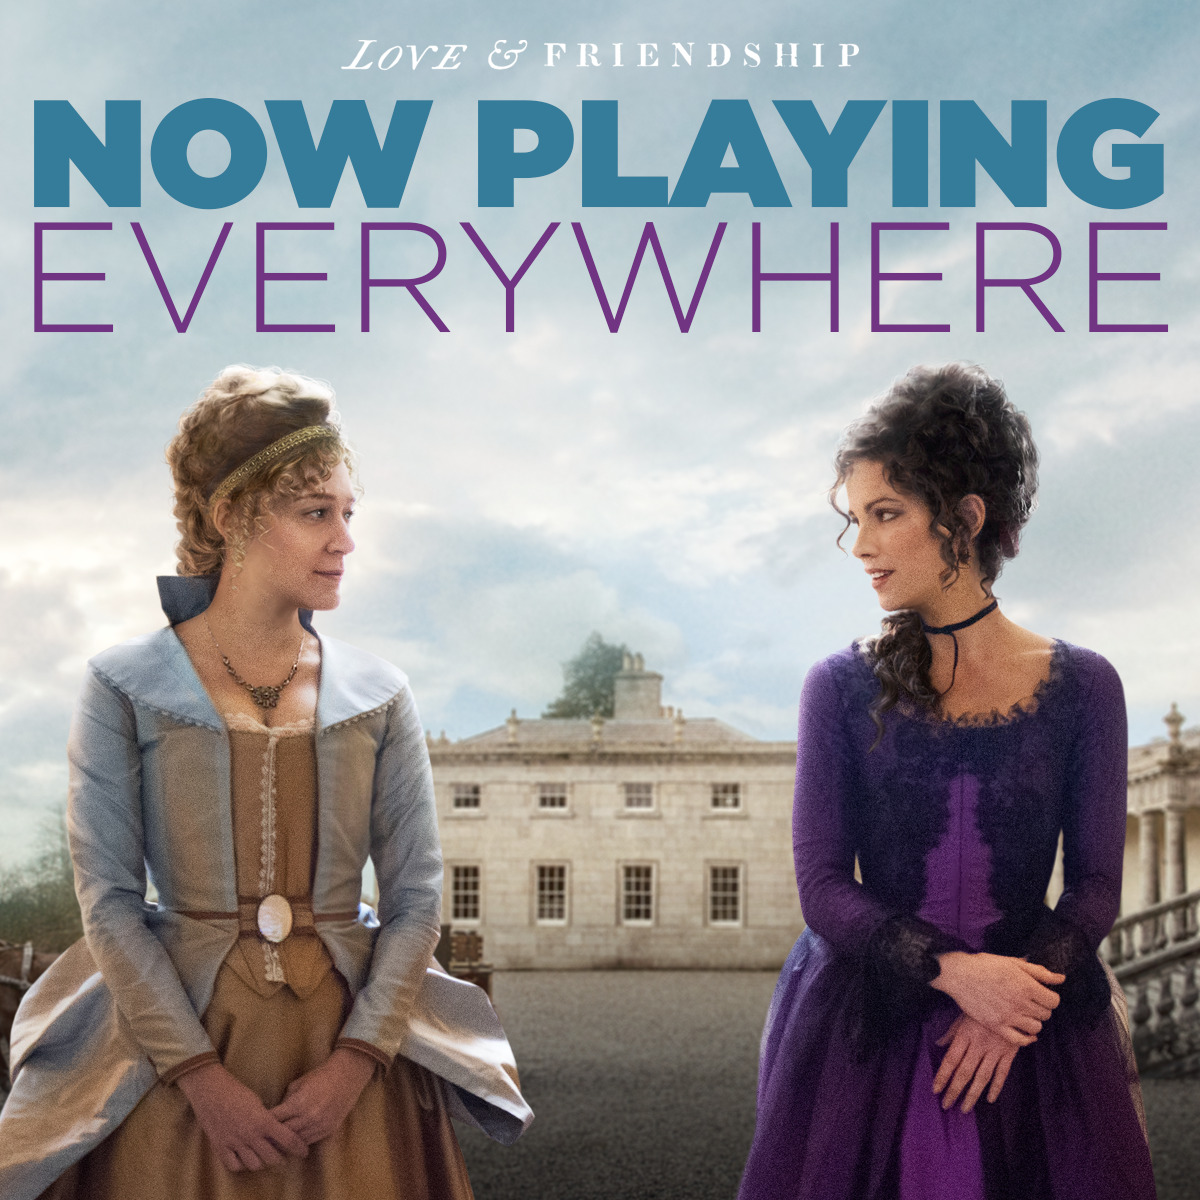 See the film fans and critics can’t get enough of - ‪#‎LoveandFriendship‬ is now playing! Tickets: http://gwi.io/y70zx6